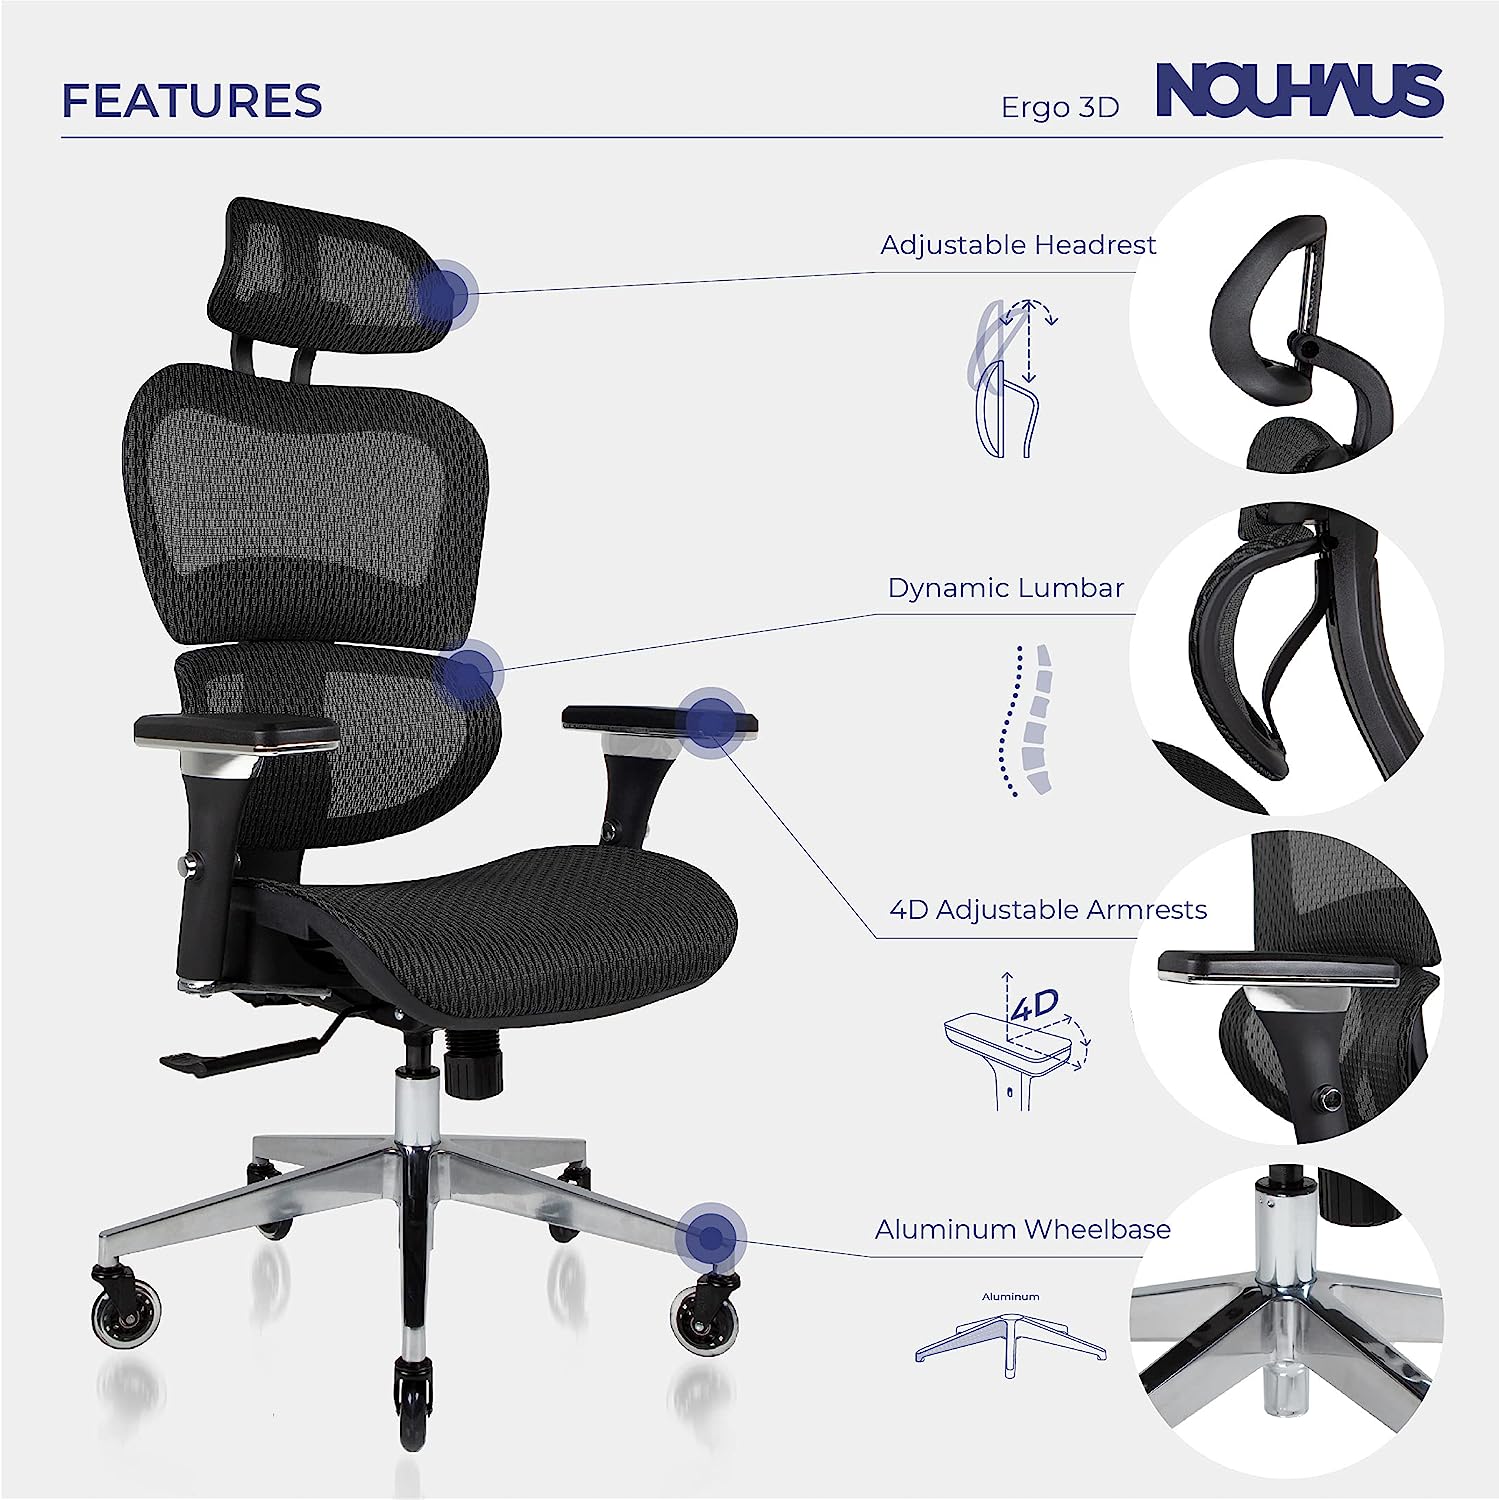 Features of Nouhaus Ergo3D office chairs